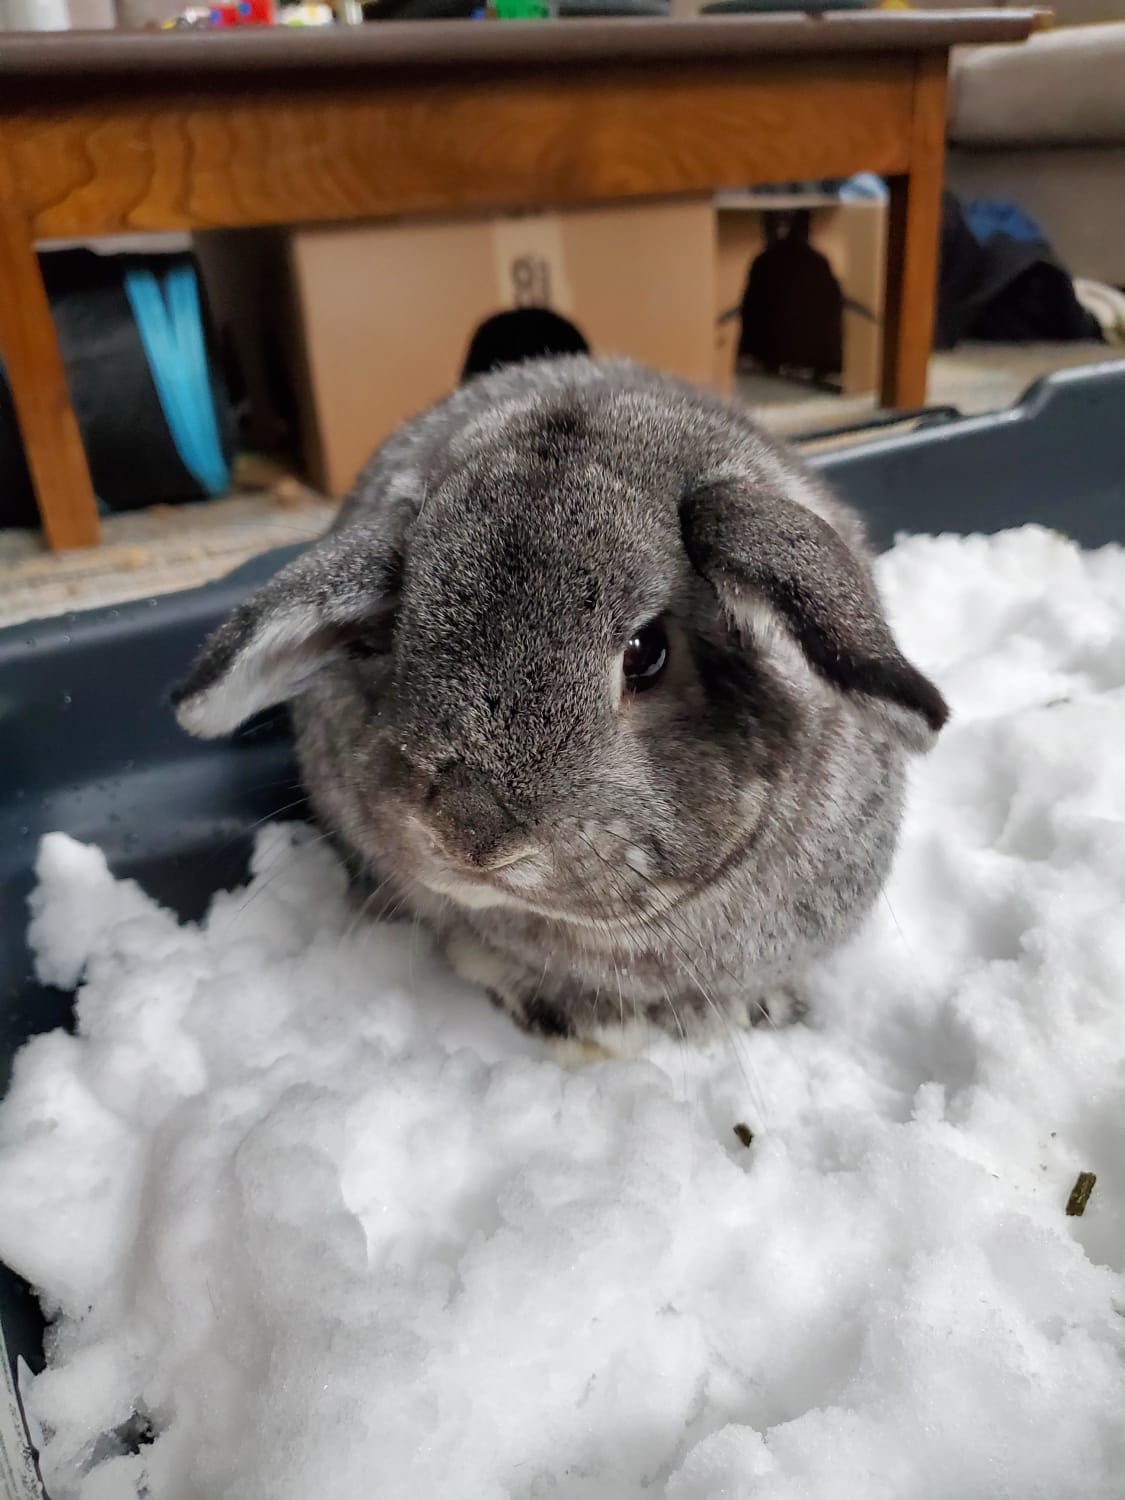 Snow bunny, but the inside only kind